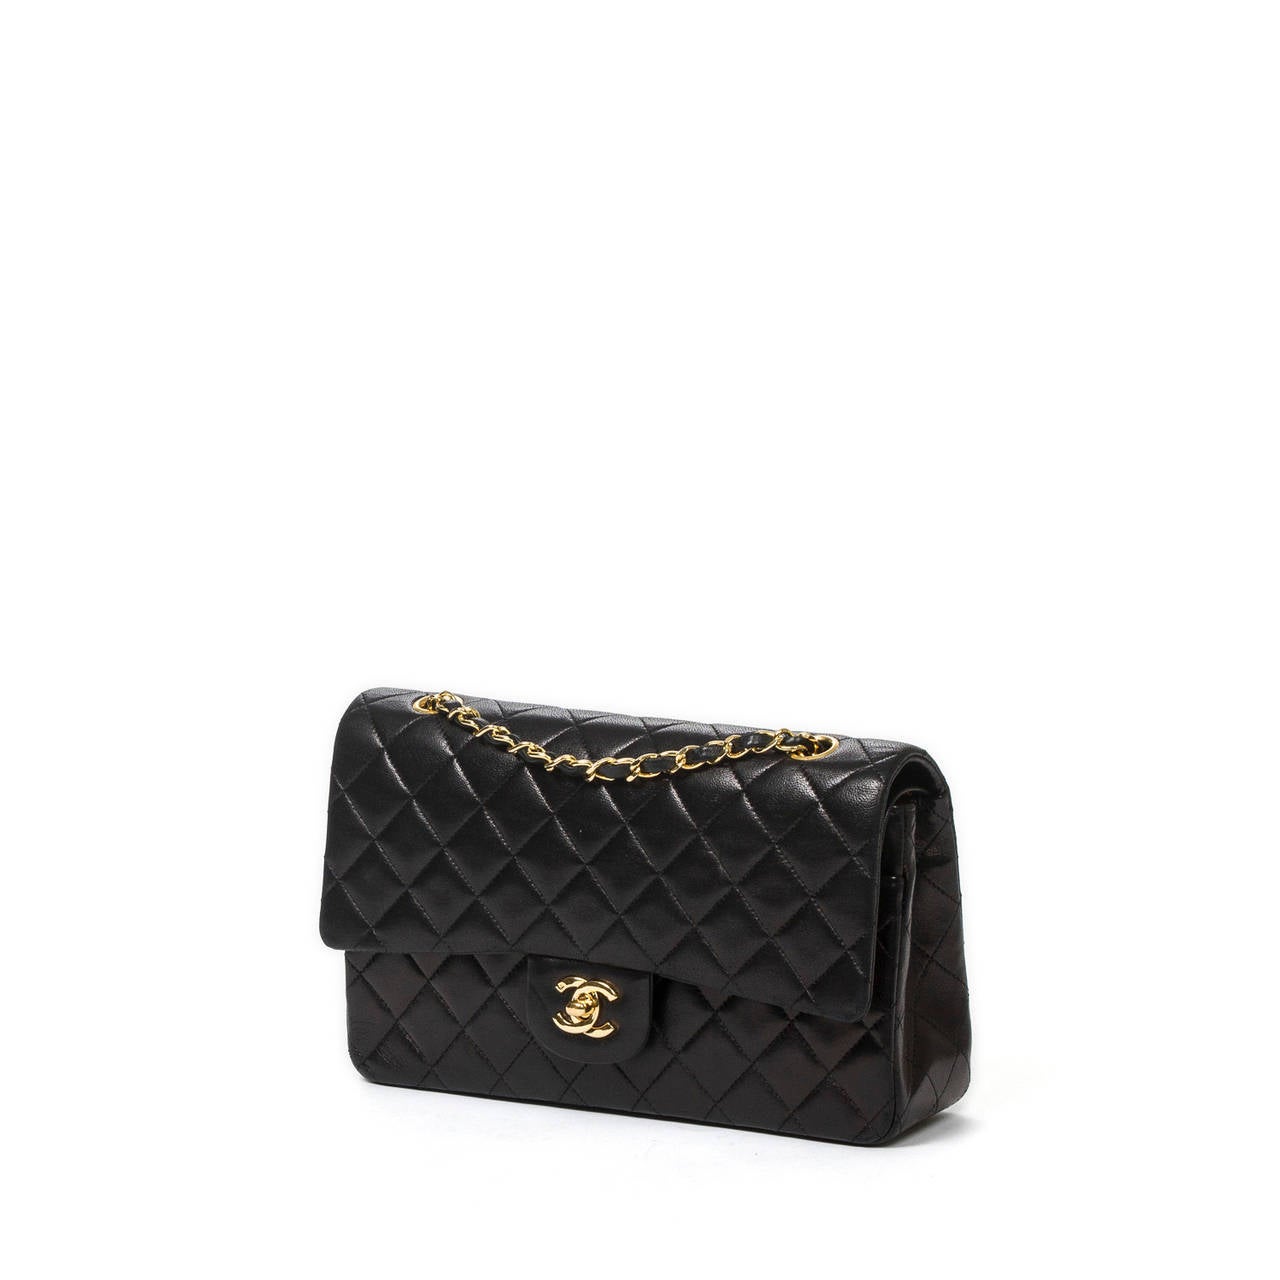 Classic double flap 26cm in black quilted leather with double chain strap interlaced with black leather, CC turnlock and gold tone hardware. Burgundy leather interior with 3 slip pockets. Dustbag and sticker included. Few scuffs on the leather,